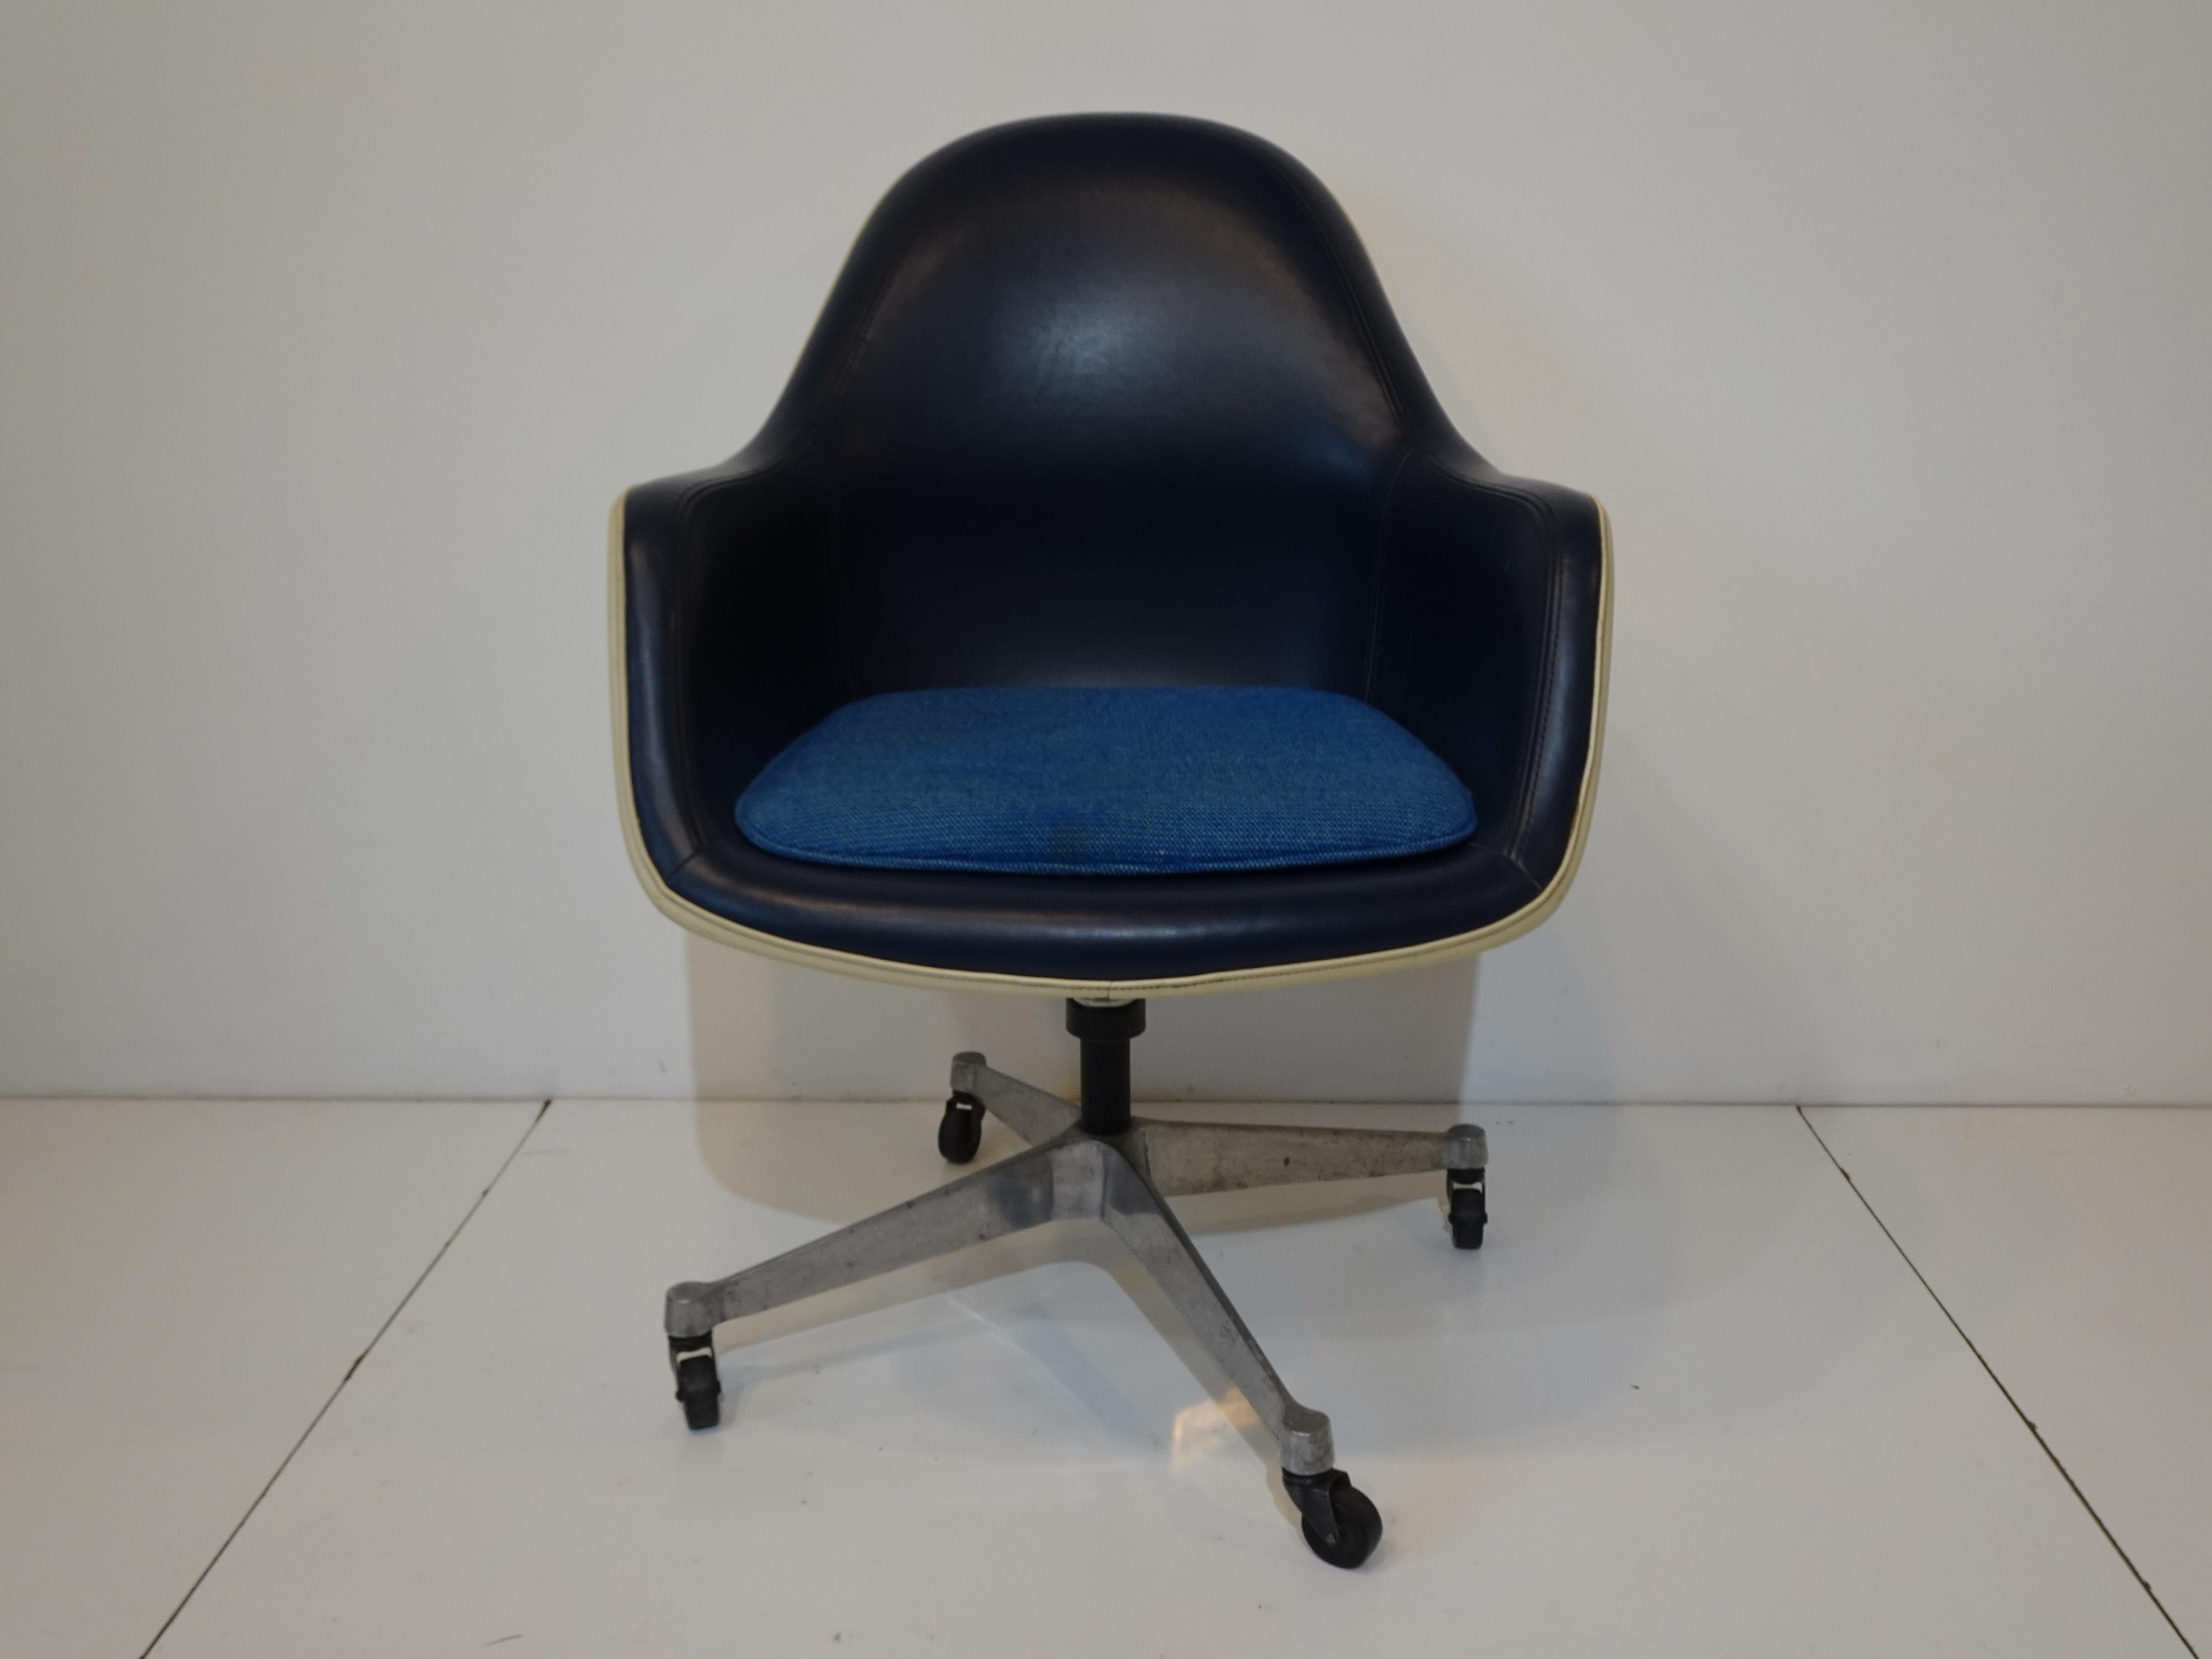 A hard to find rare Eames rolling high back desk arm chair with white fiberglass shell, dark blue Naugahyde upholstery and lighter blue seat pad . The star base is in cast aluminum with black rubber wheels and is adjustable manufactured by the